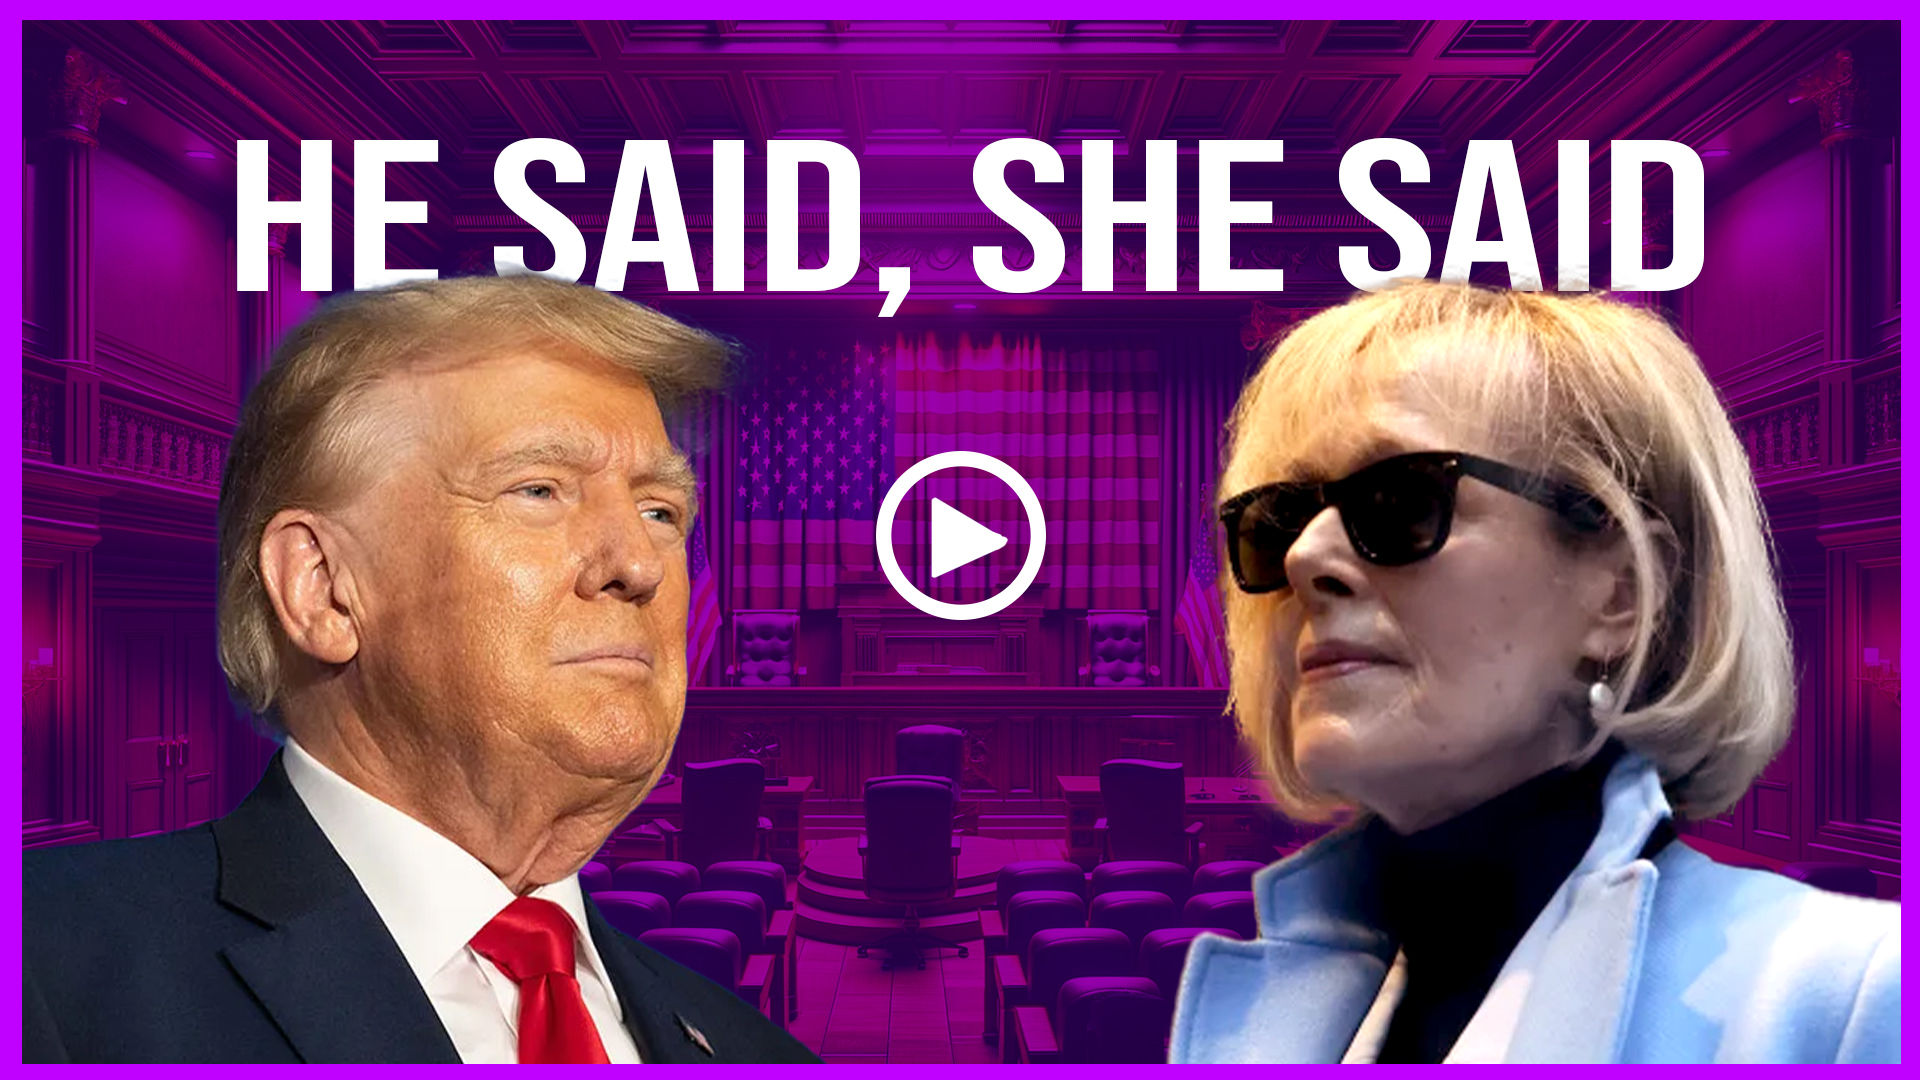 He Said, She Said in the Courtroom #news #trump #court